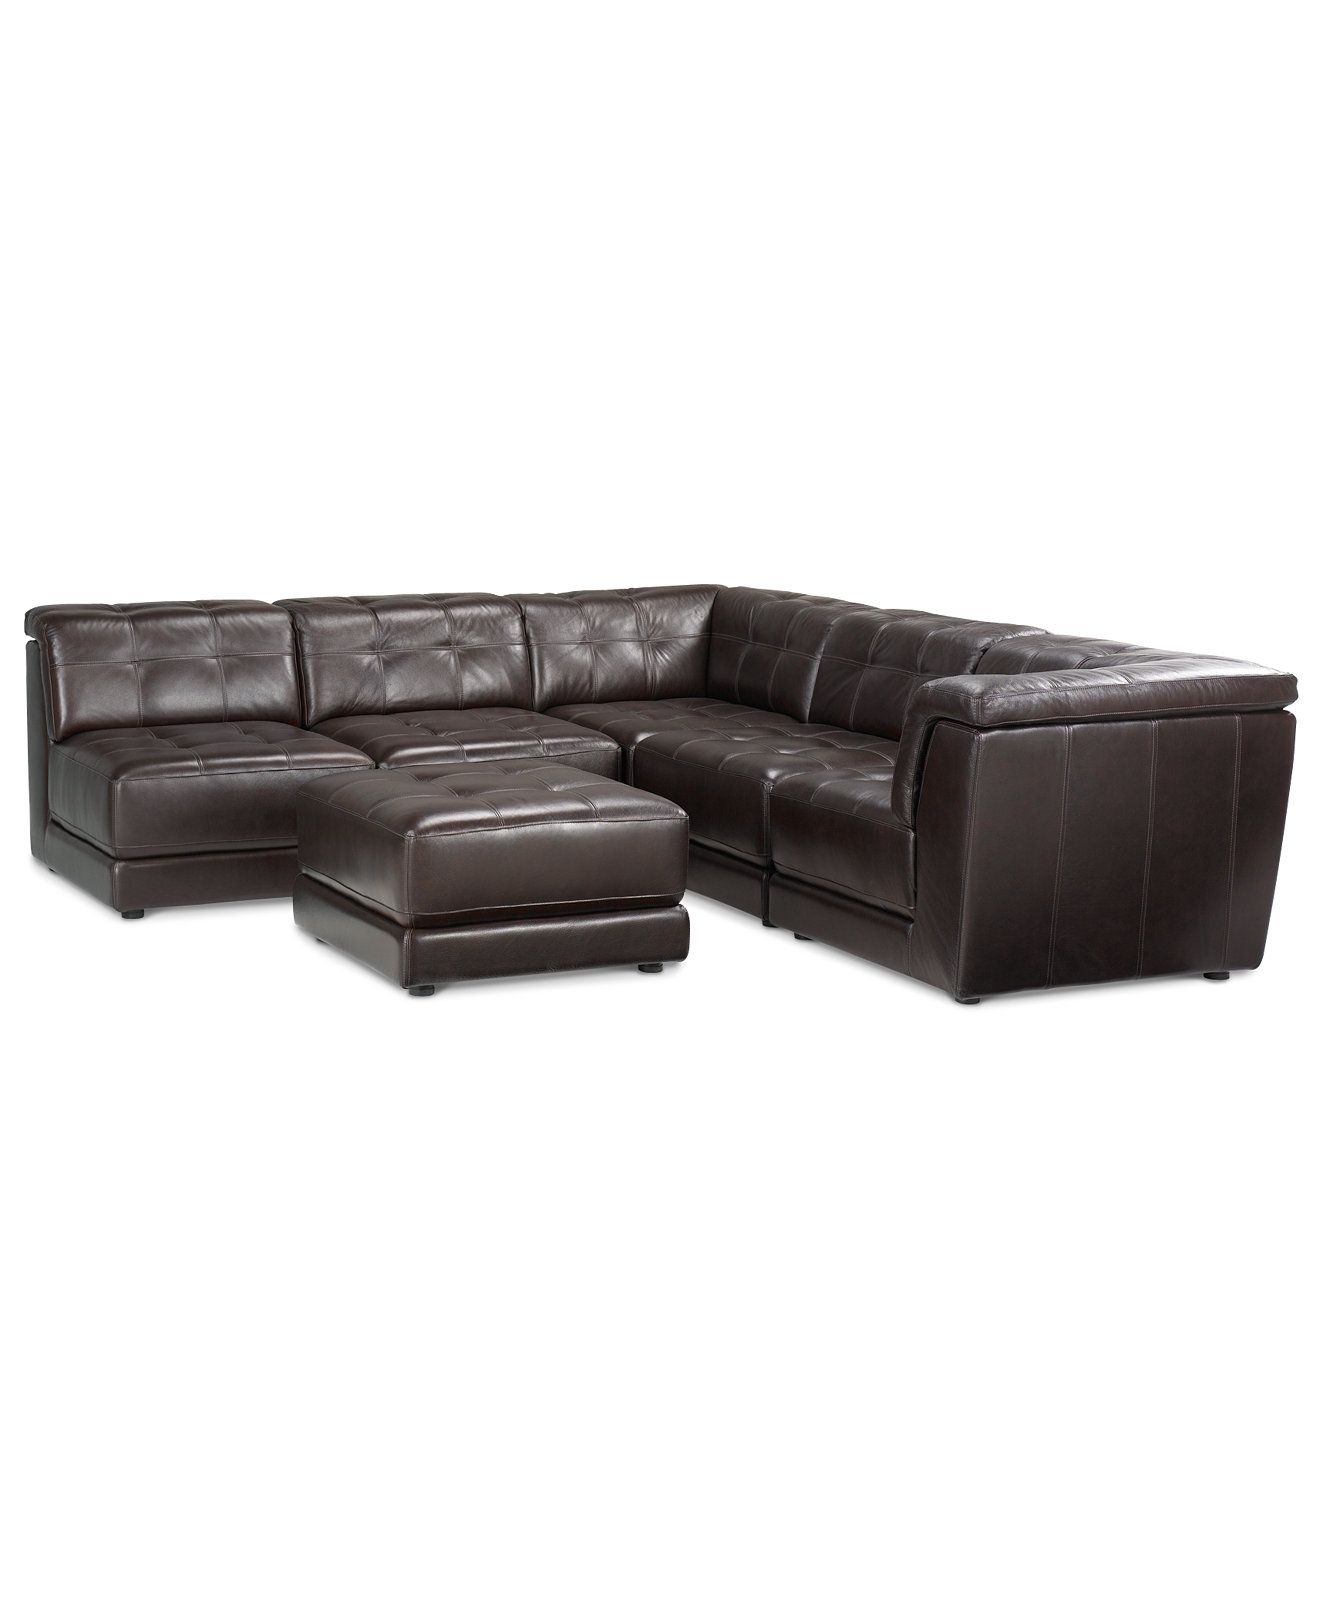 Stacey Leather 6 Piece Modular Sectional Sofa 3 Armless Chairs 2 In 6 Piece Leather Sectional Sofa (View 10 of 12)